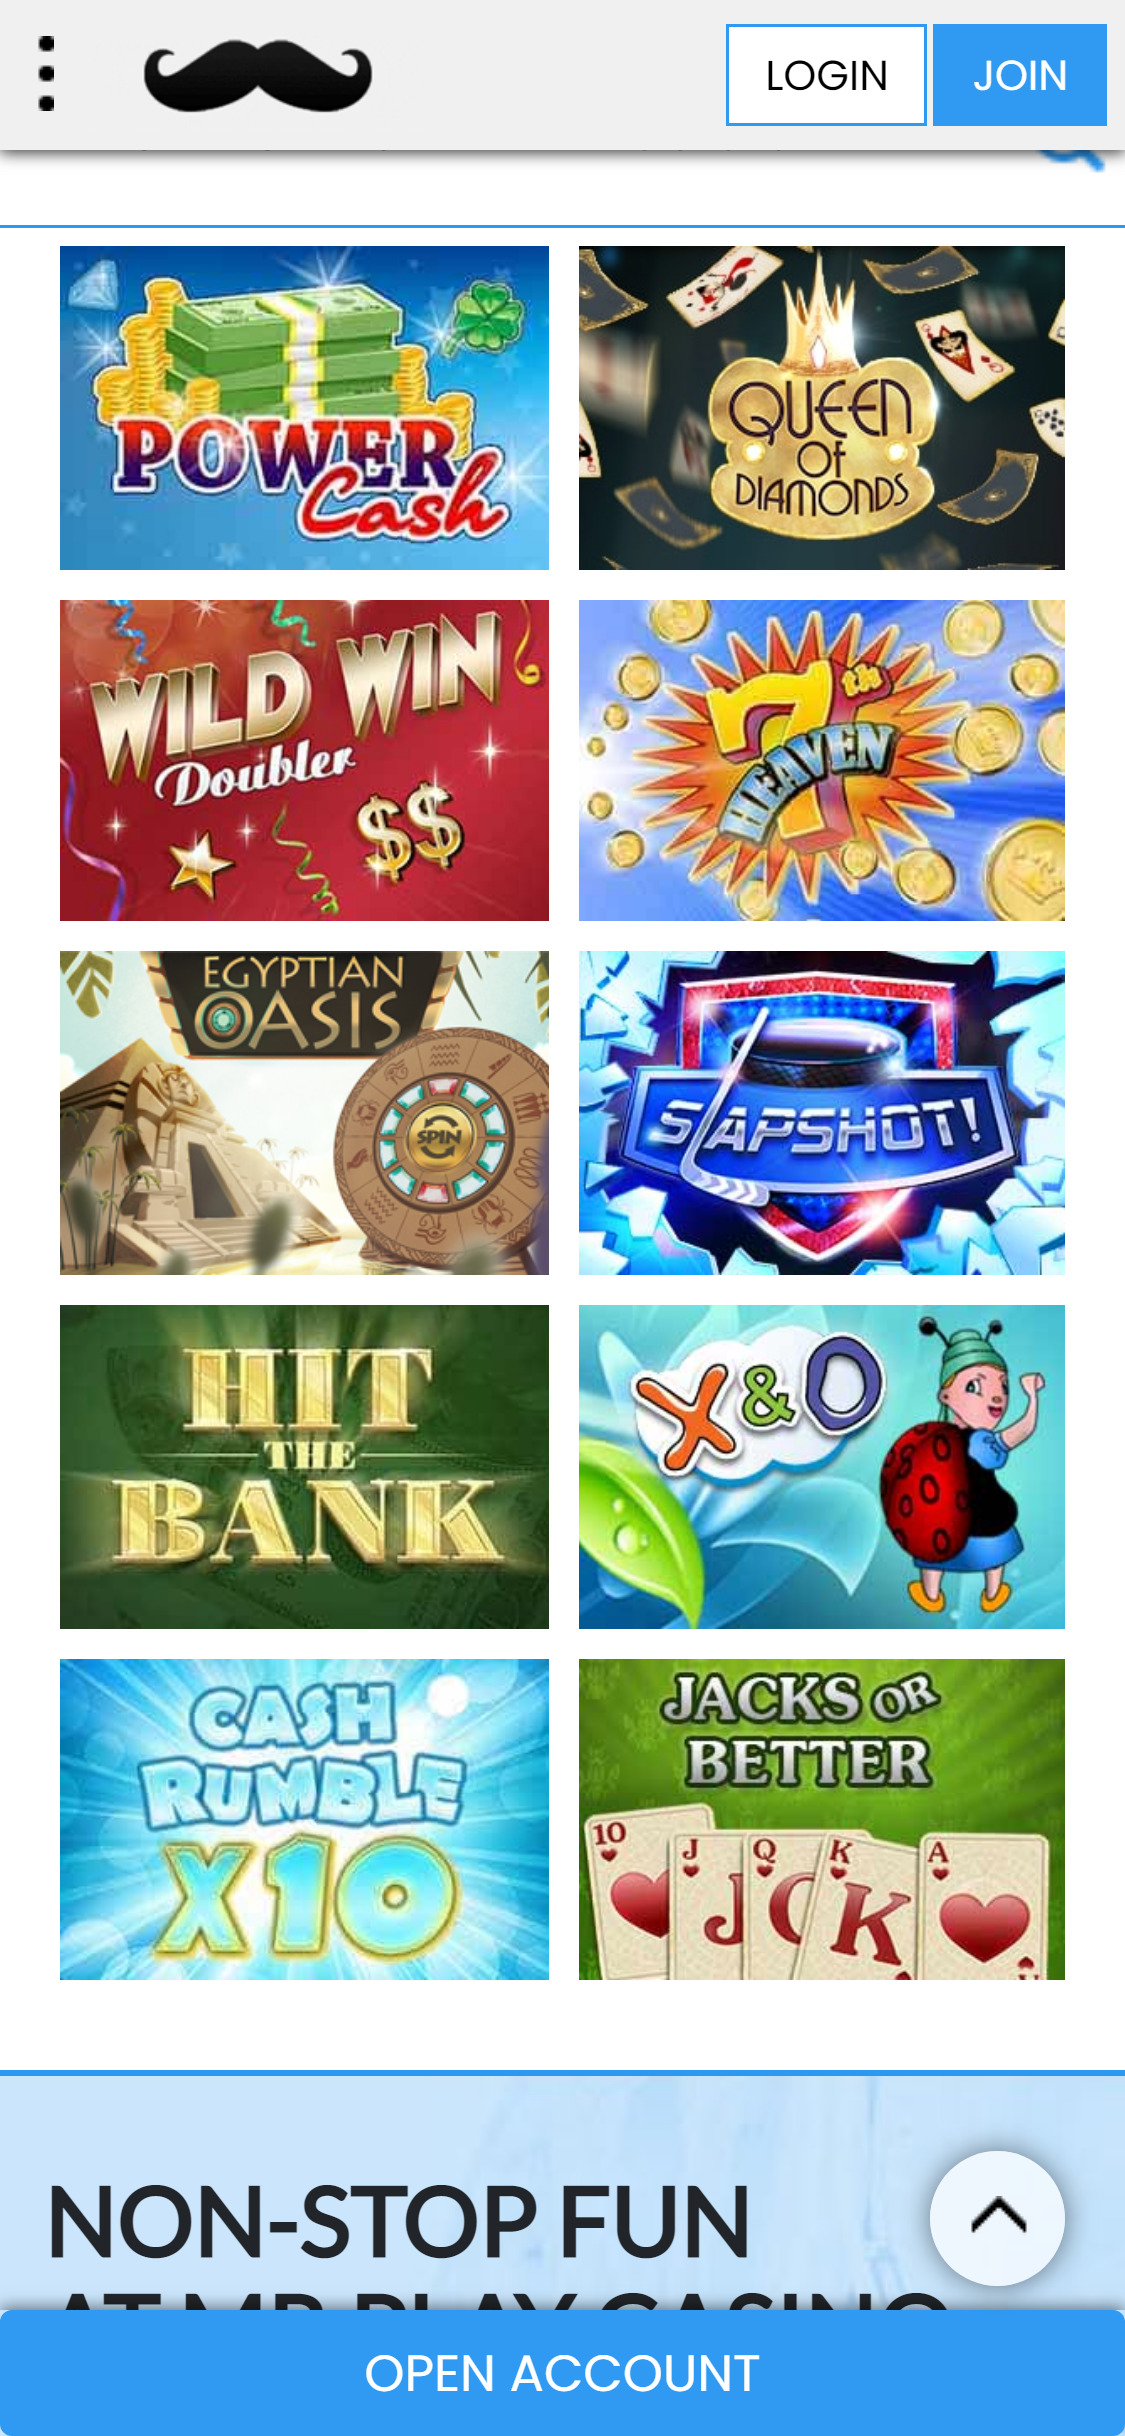 Mr Play Casino Mobile Games Review